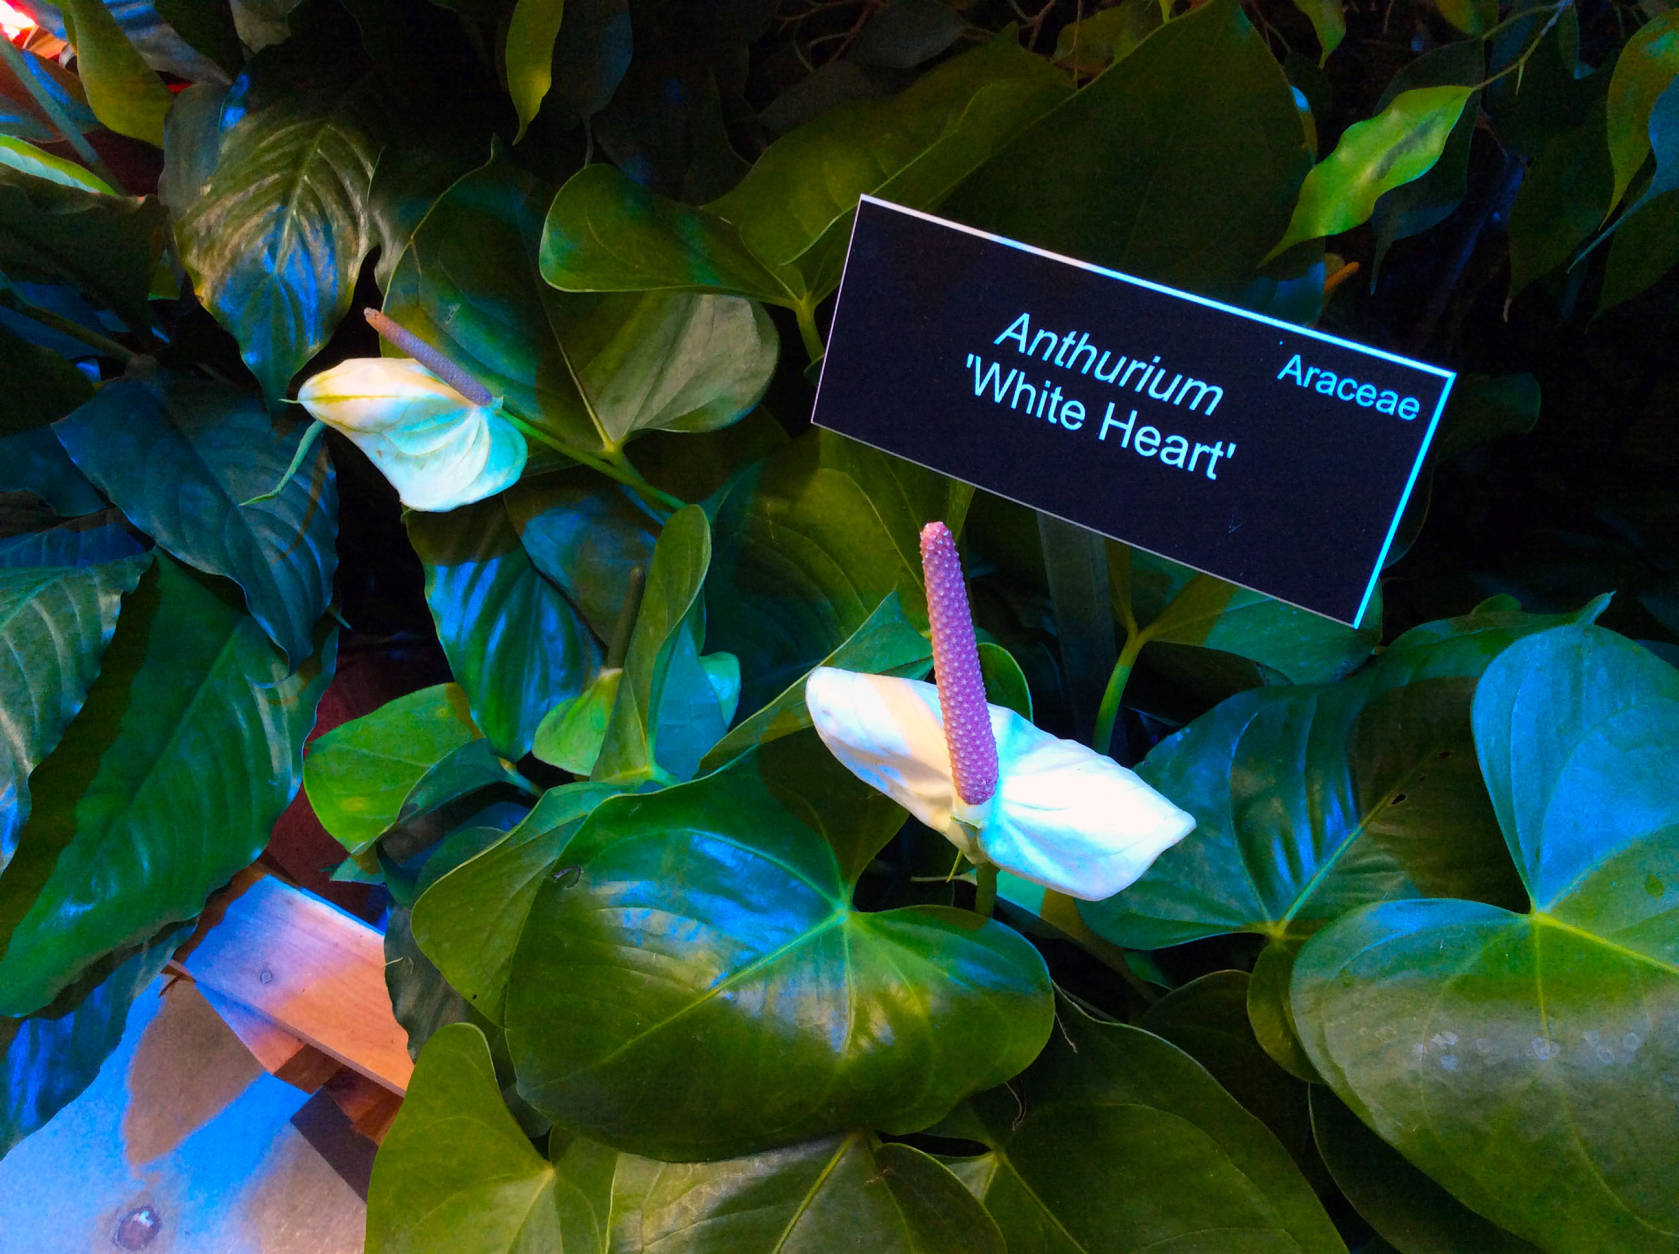 From exotic orchards to festive garlands, visitors can find all sorts of gems throughout the exhibit. (WTOP/Hanna Choi)